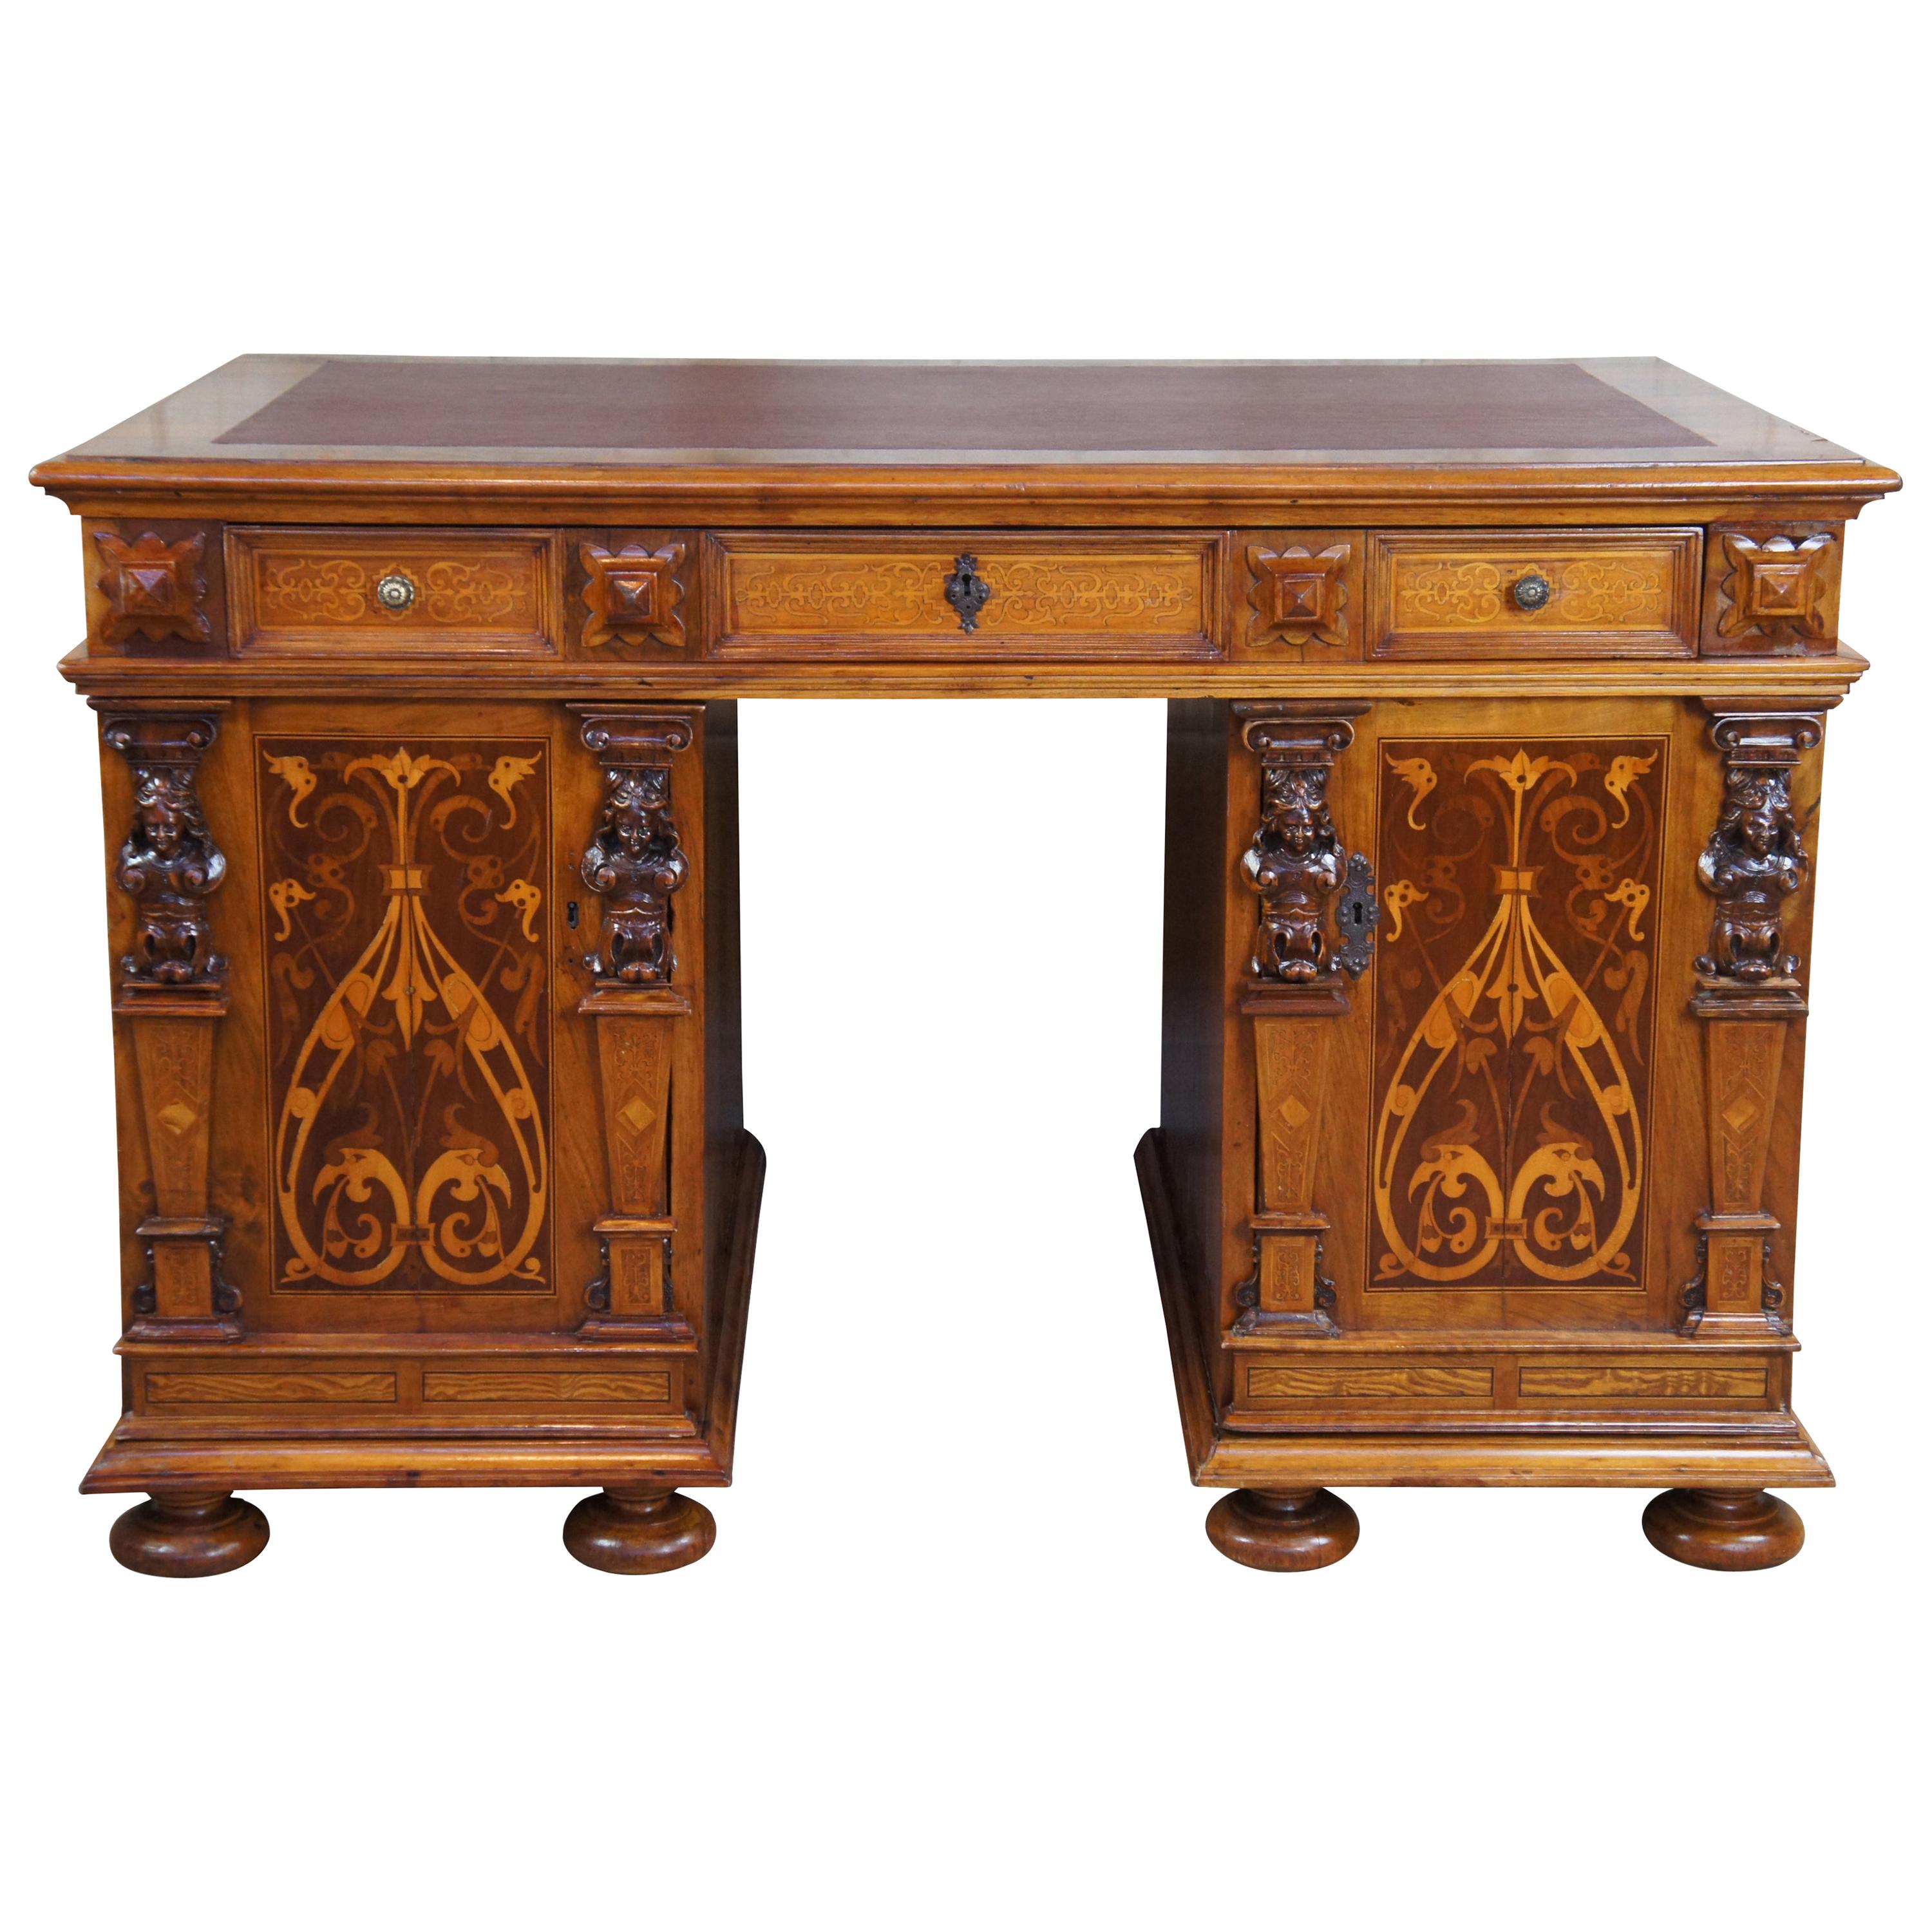 Antique Italian Neoclassical Walnut Marquetry Figural Writing Desk Library Table